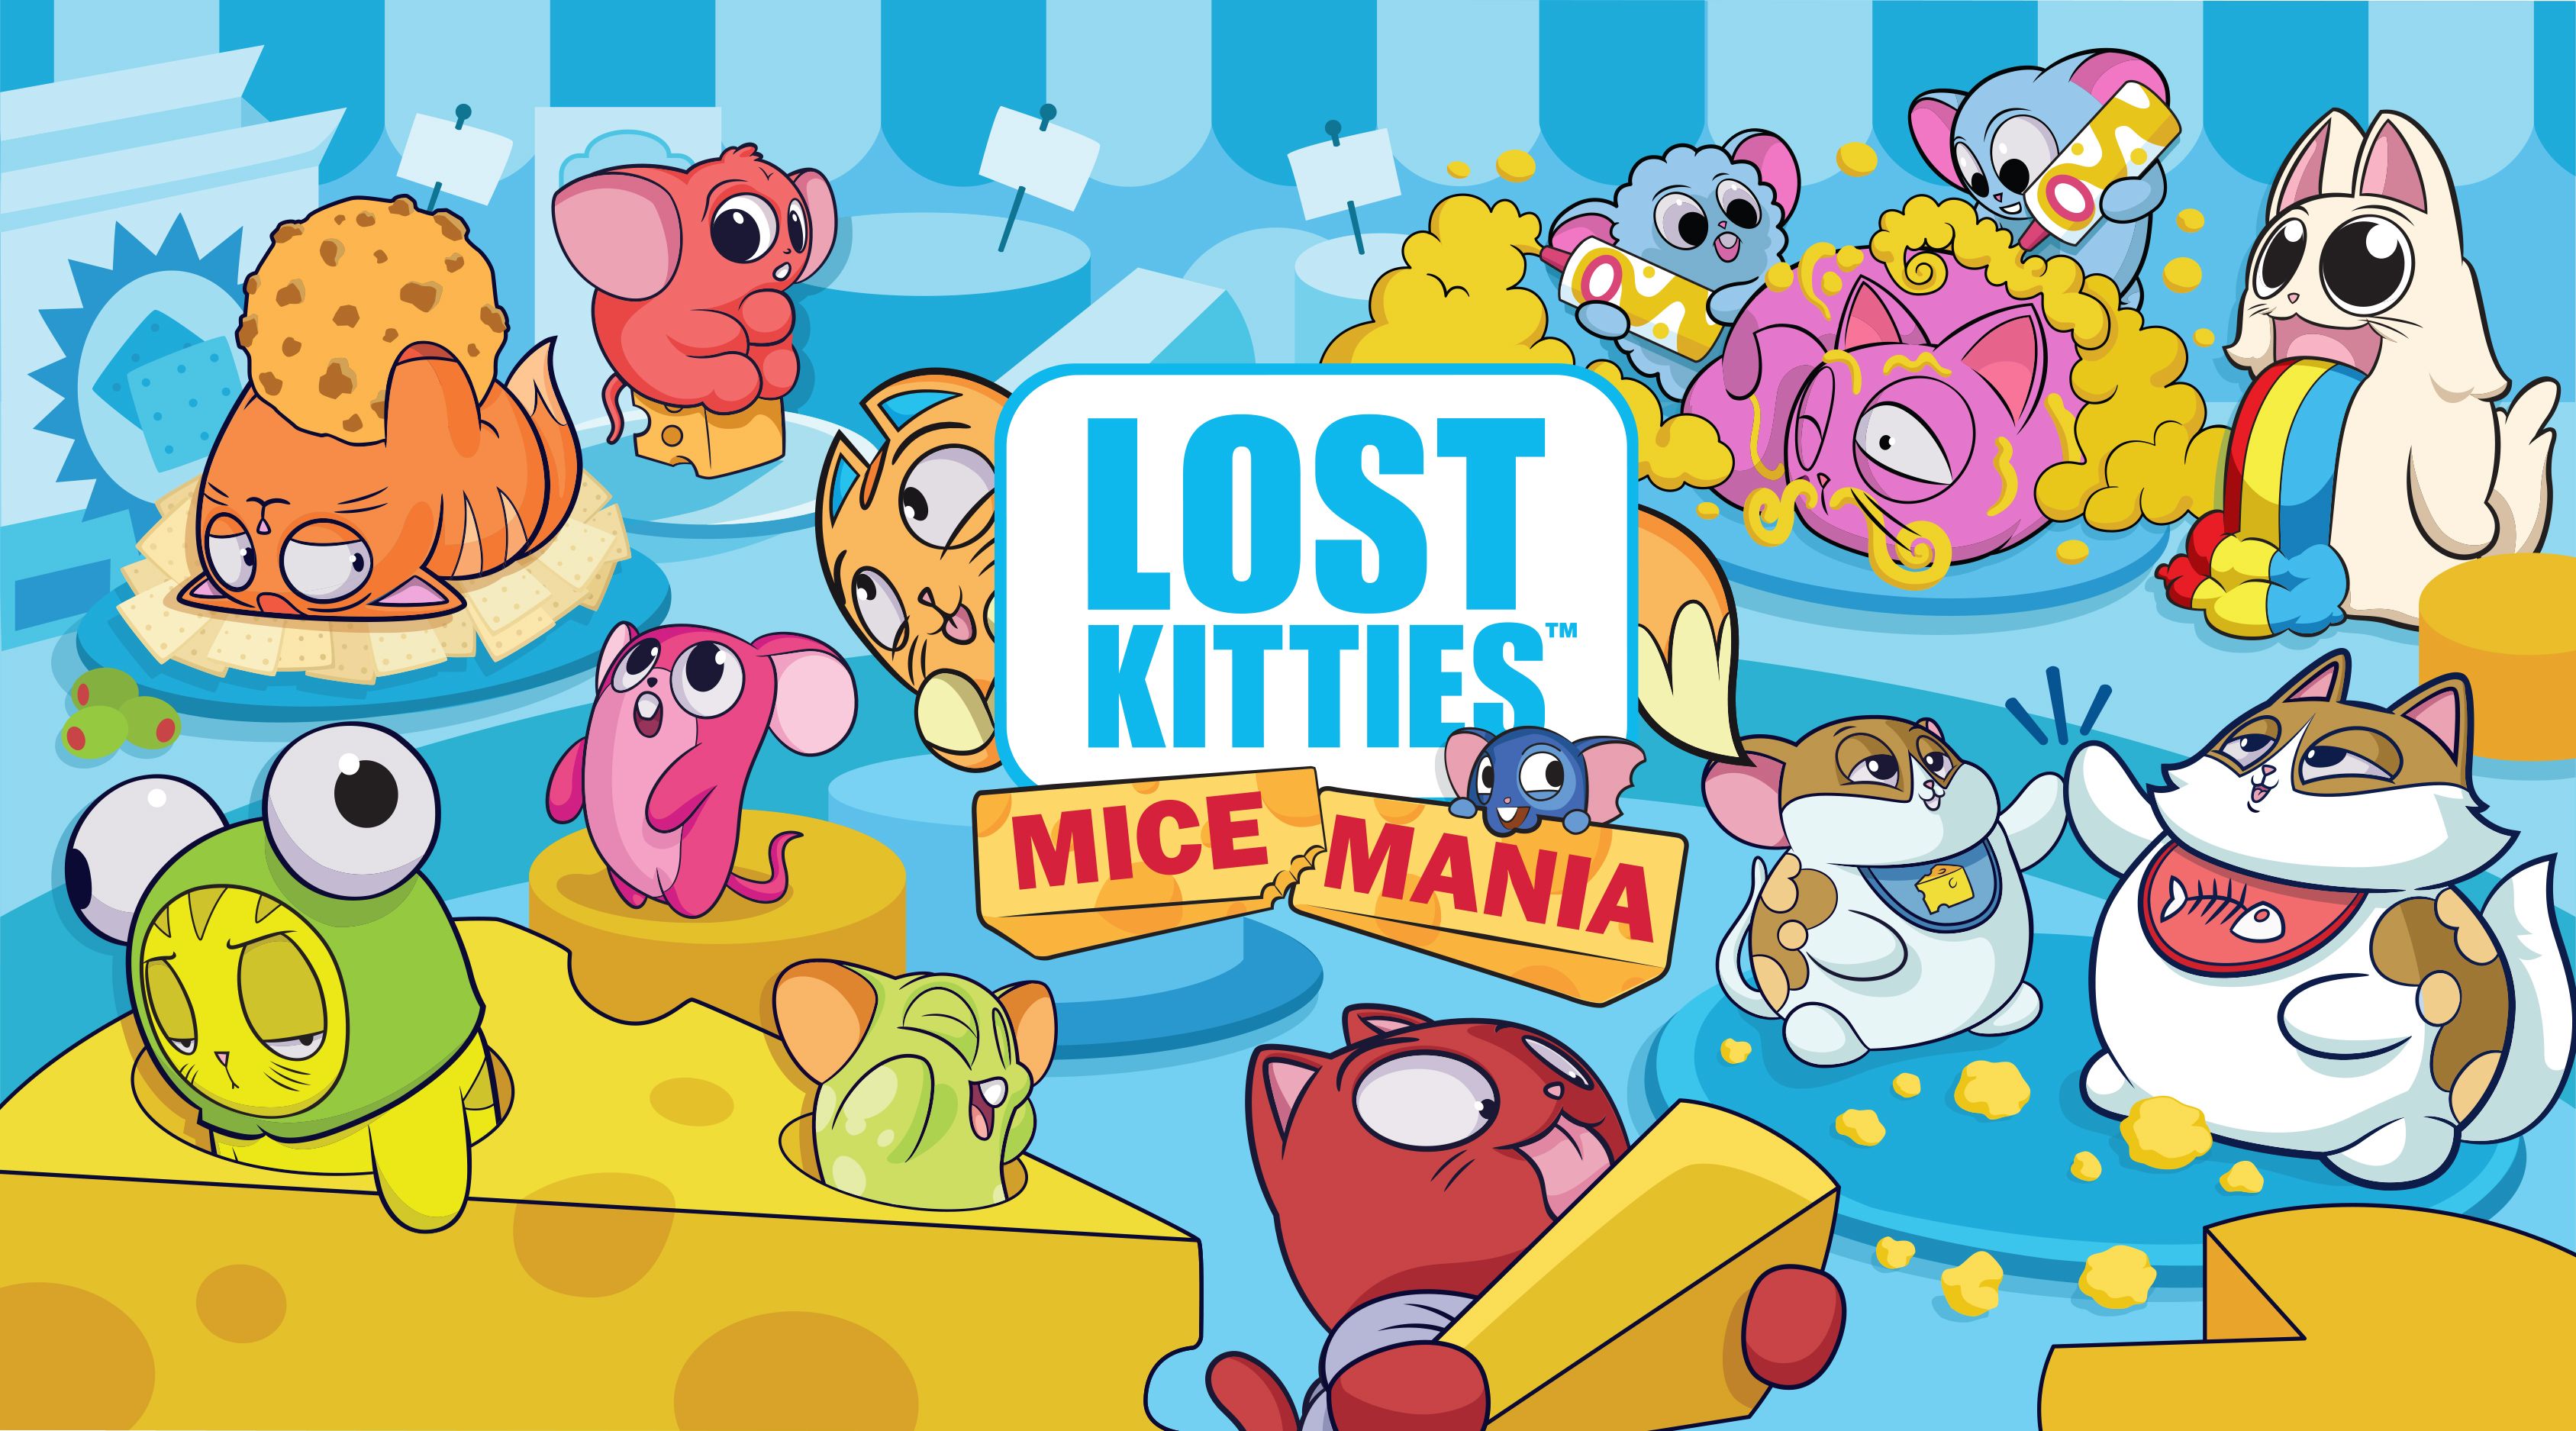 Hasbro Lost Kitties Mice Mania Multipack Toy, Ages 5 & Up (Series 3)